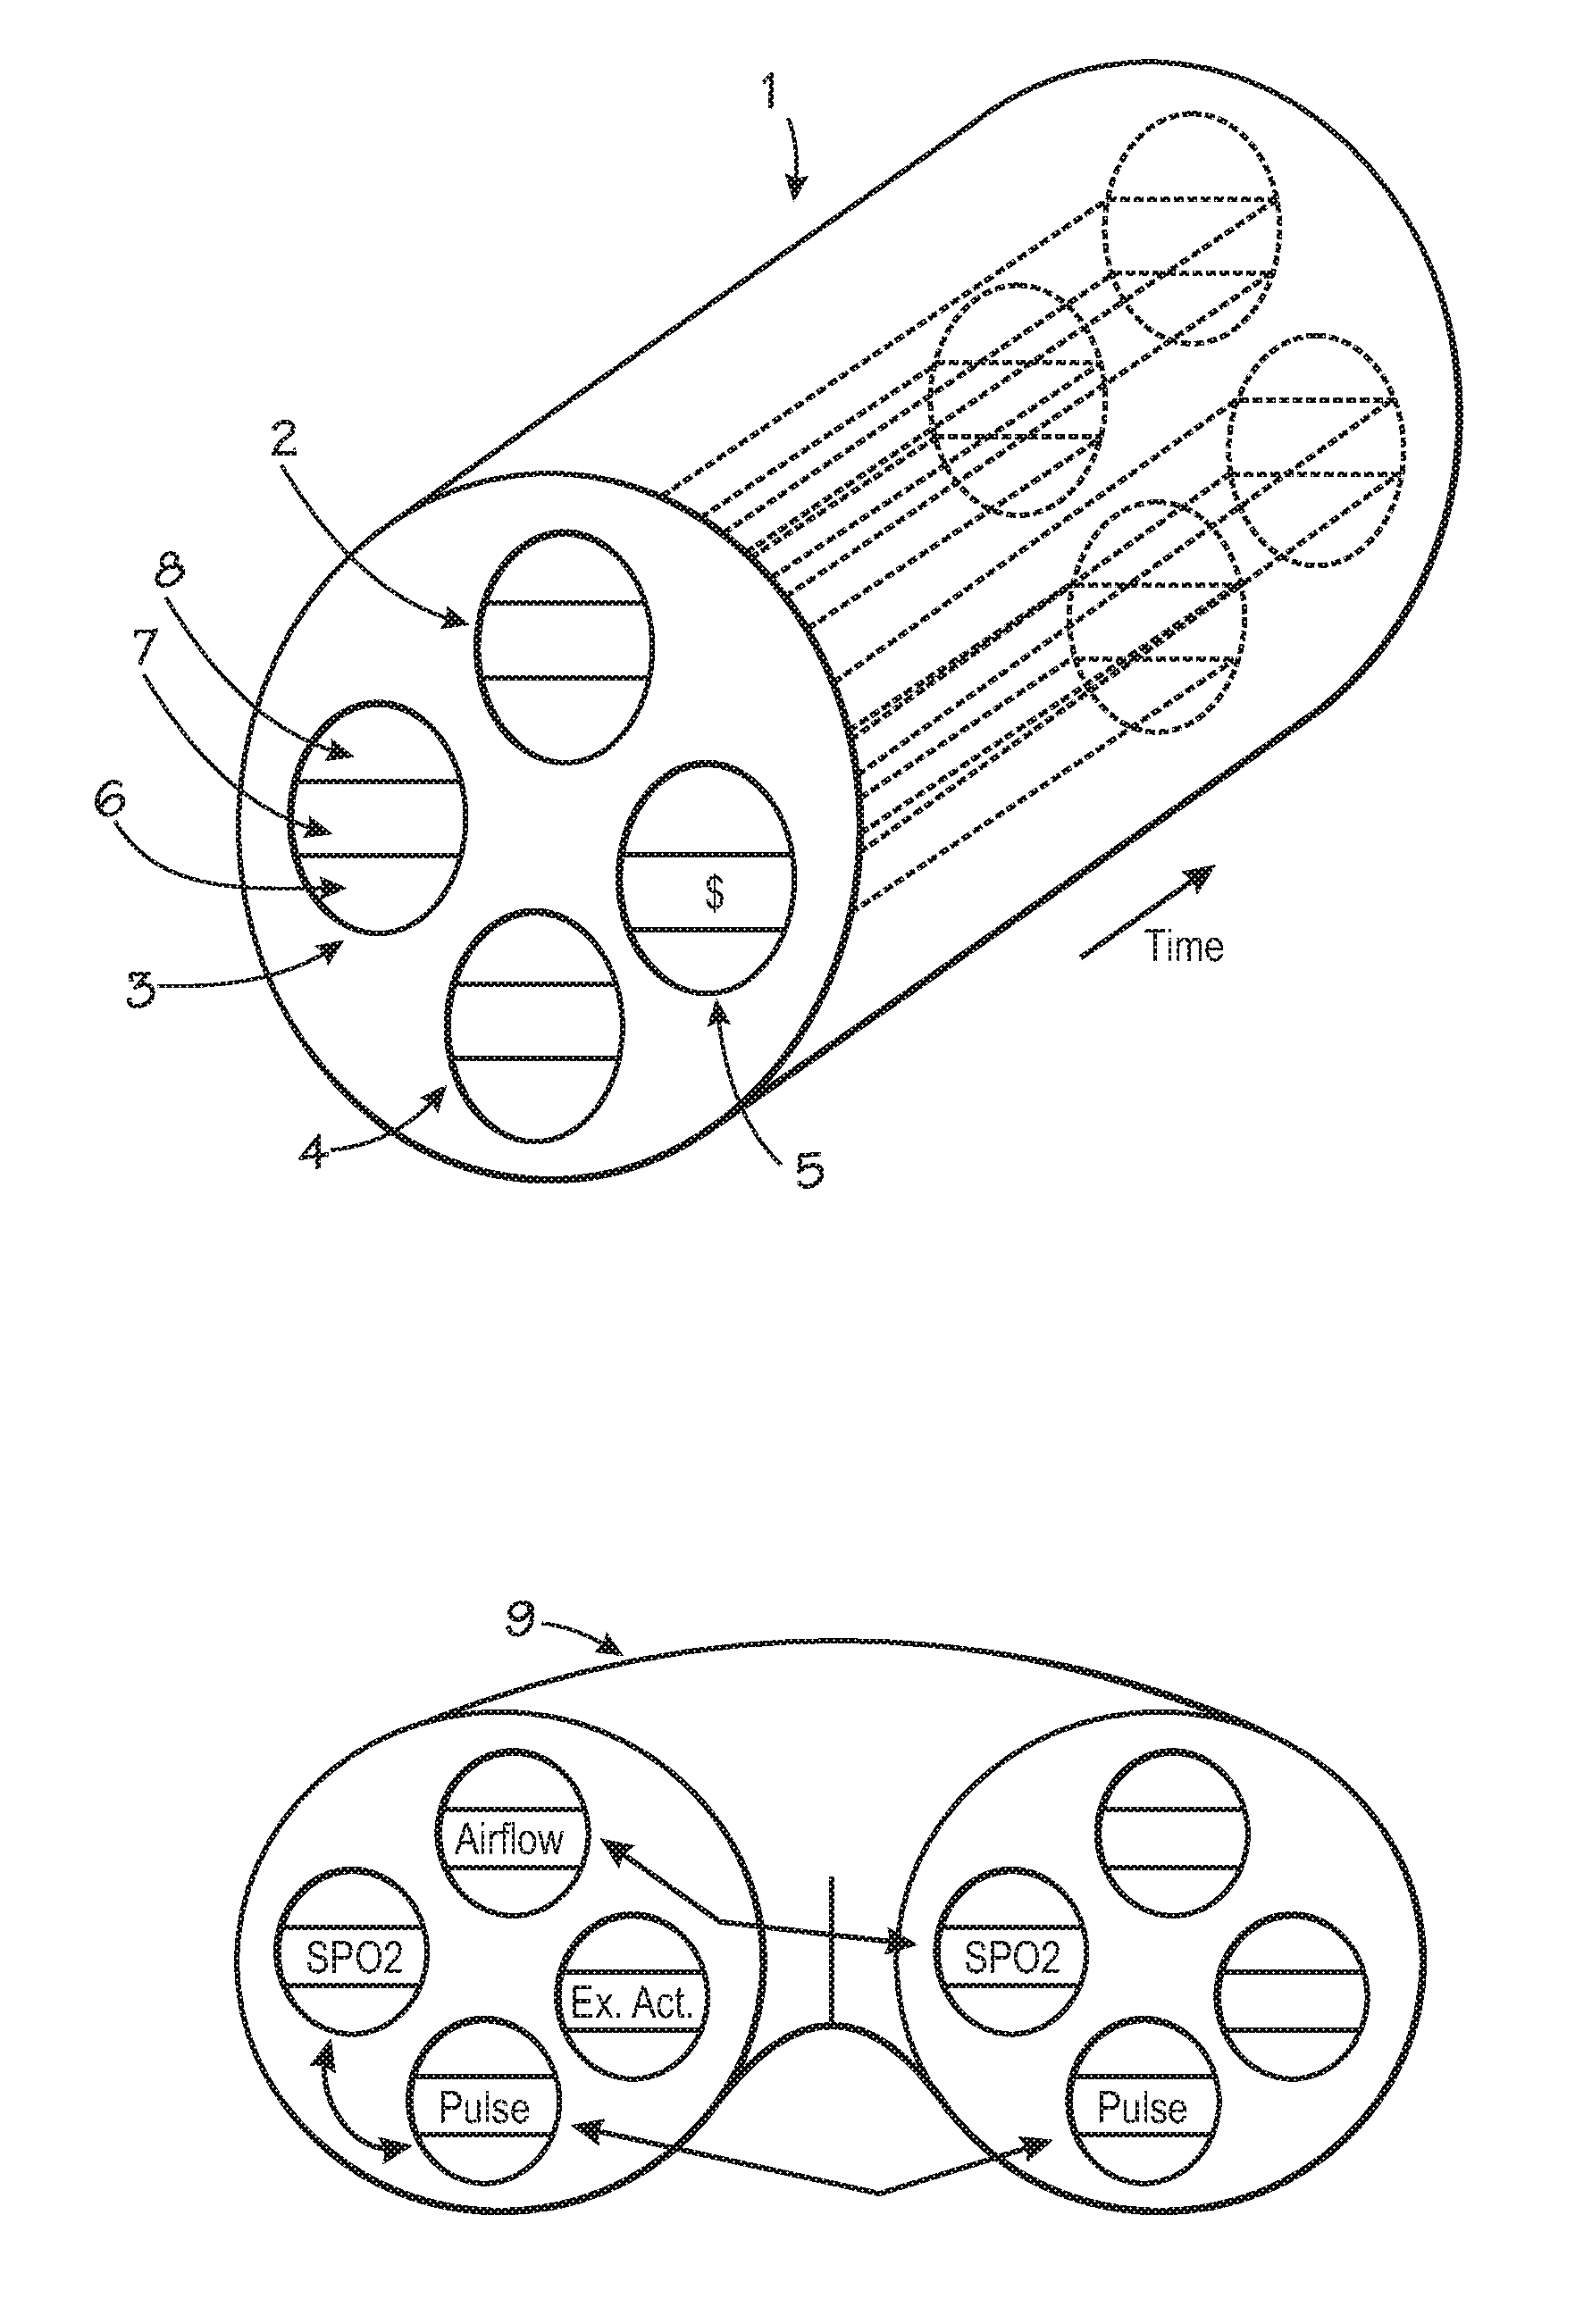 Centralized hospital monitoring system for automatically detecting upper airway instability and for preventing and aborting adverse drug reactions